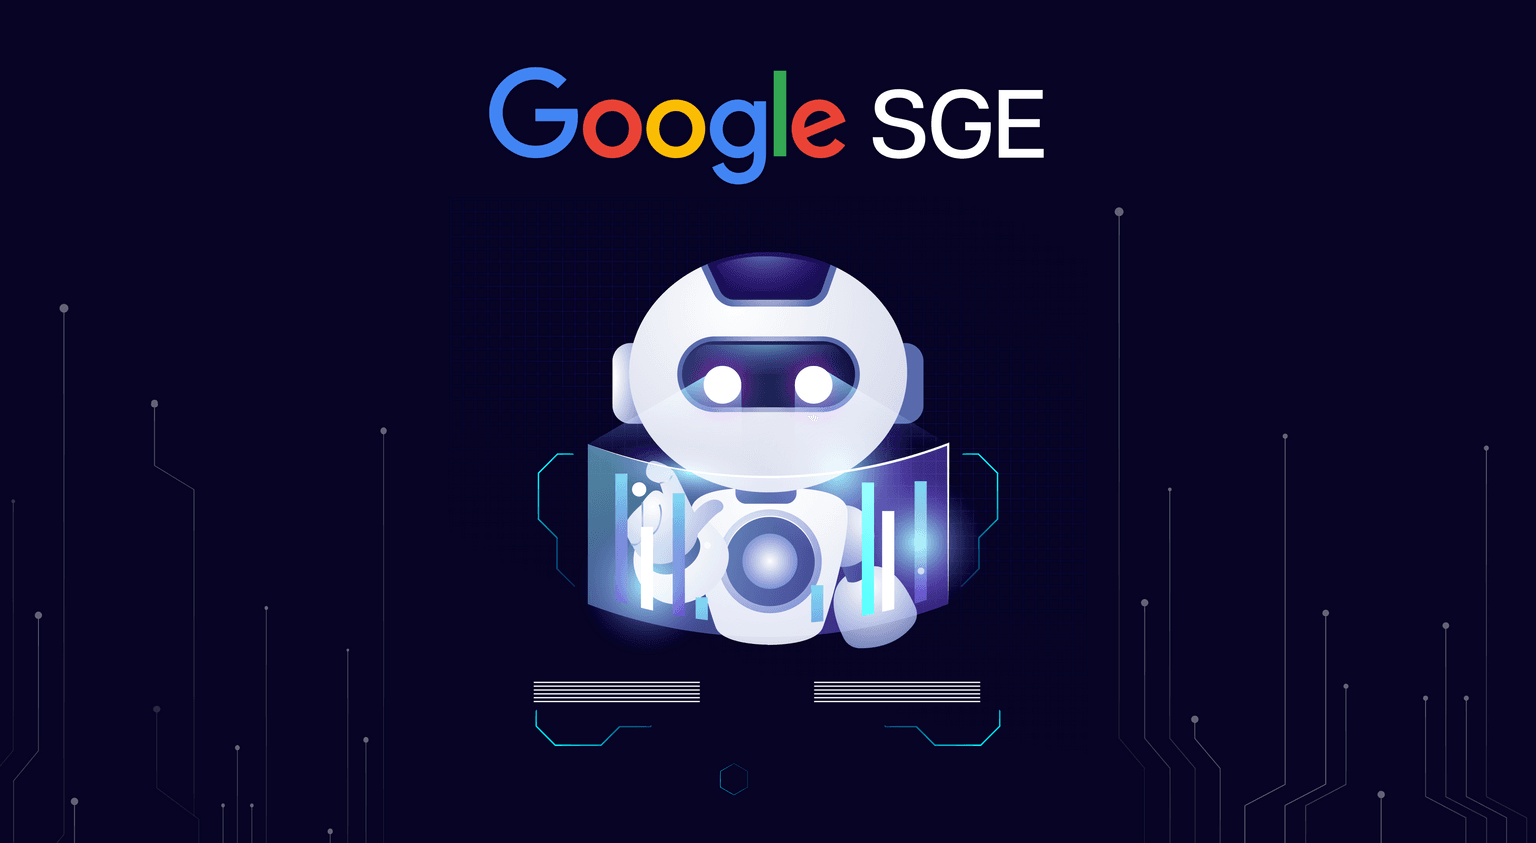 SGE is an early step in transforming the Search experience with generative AI.